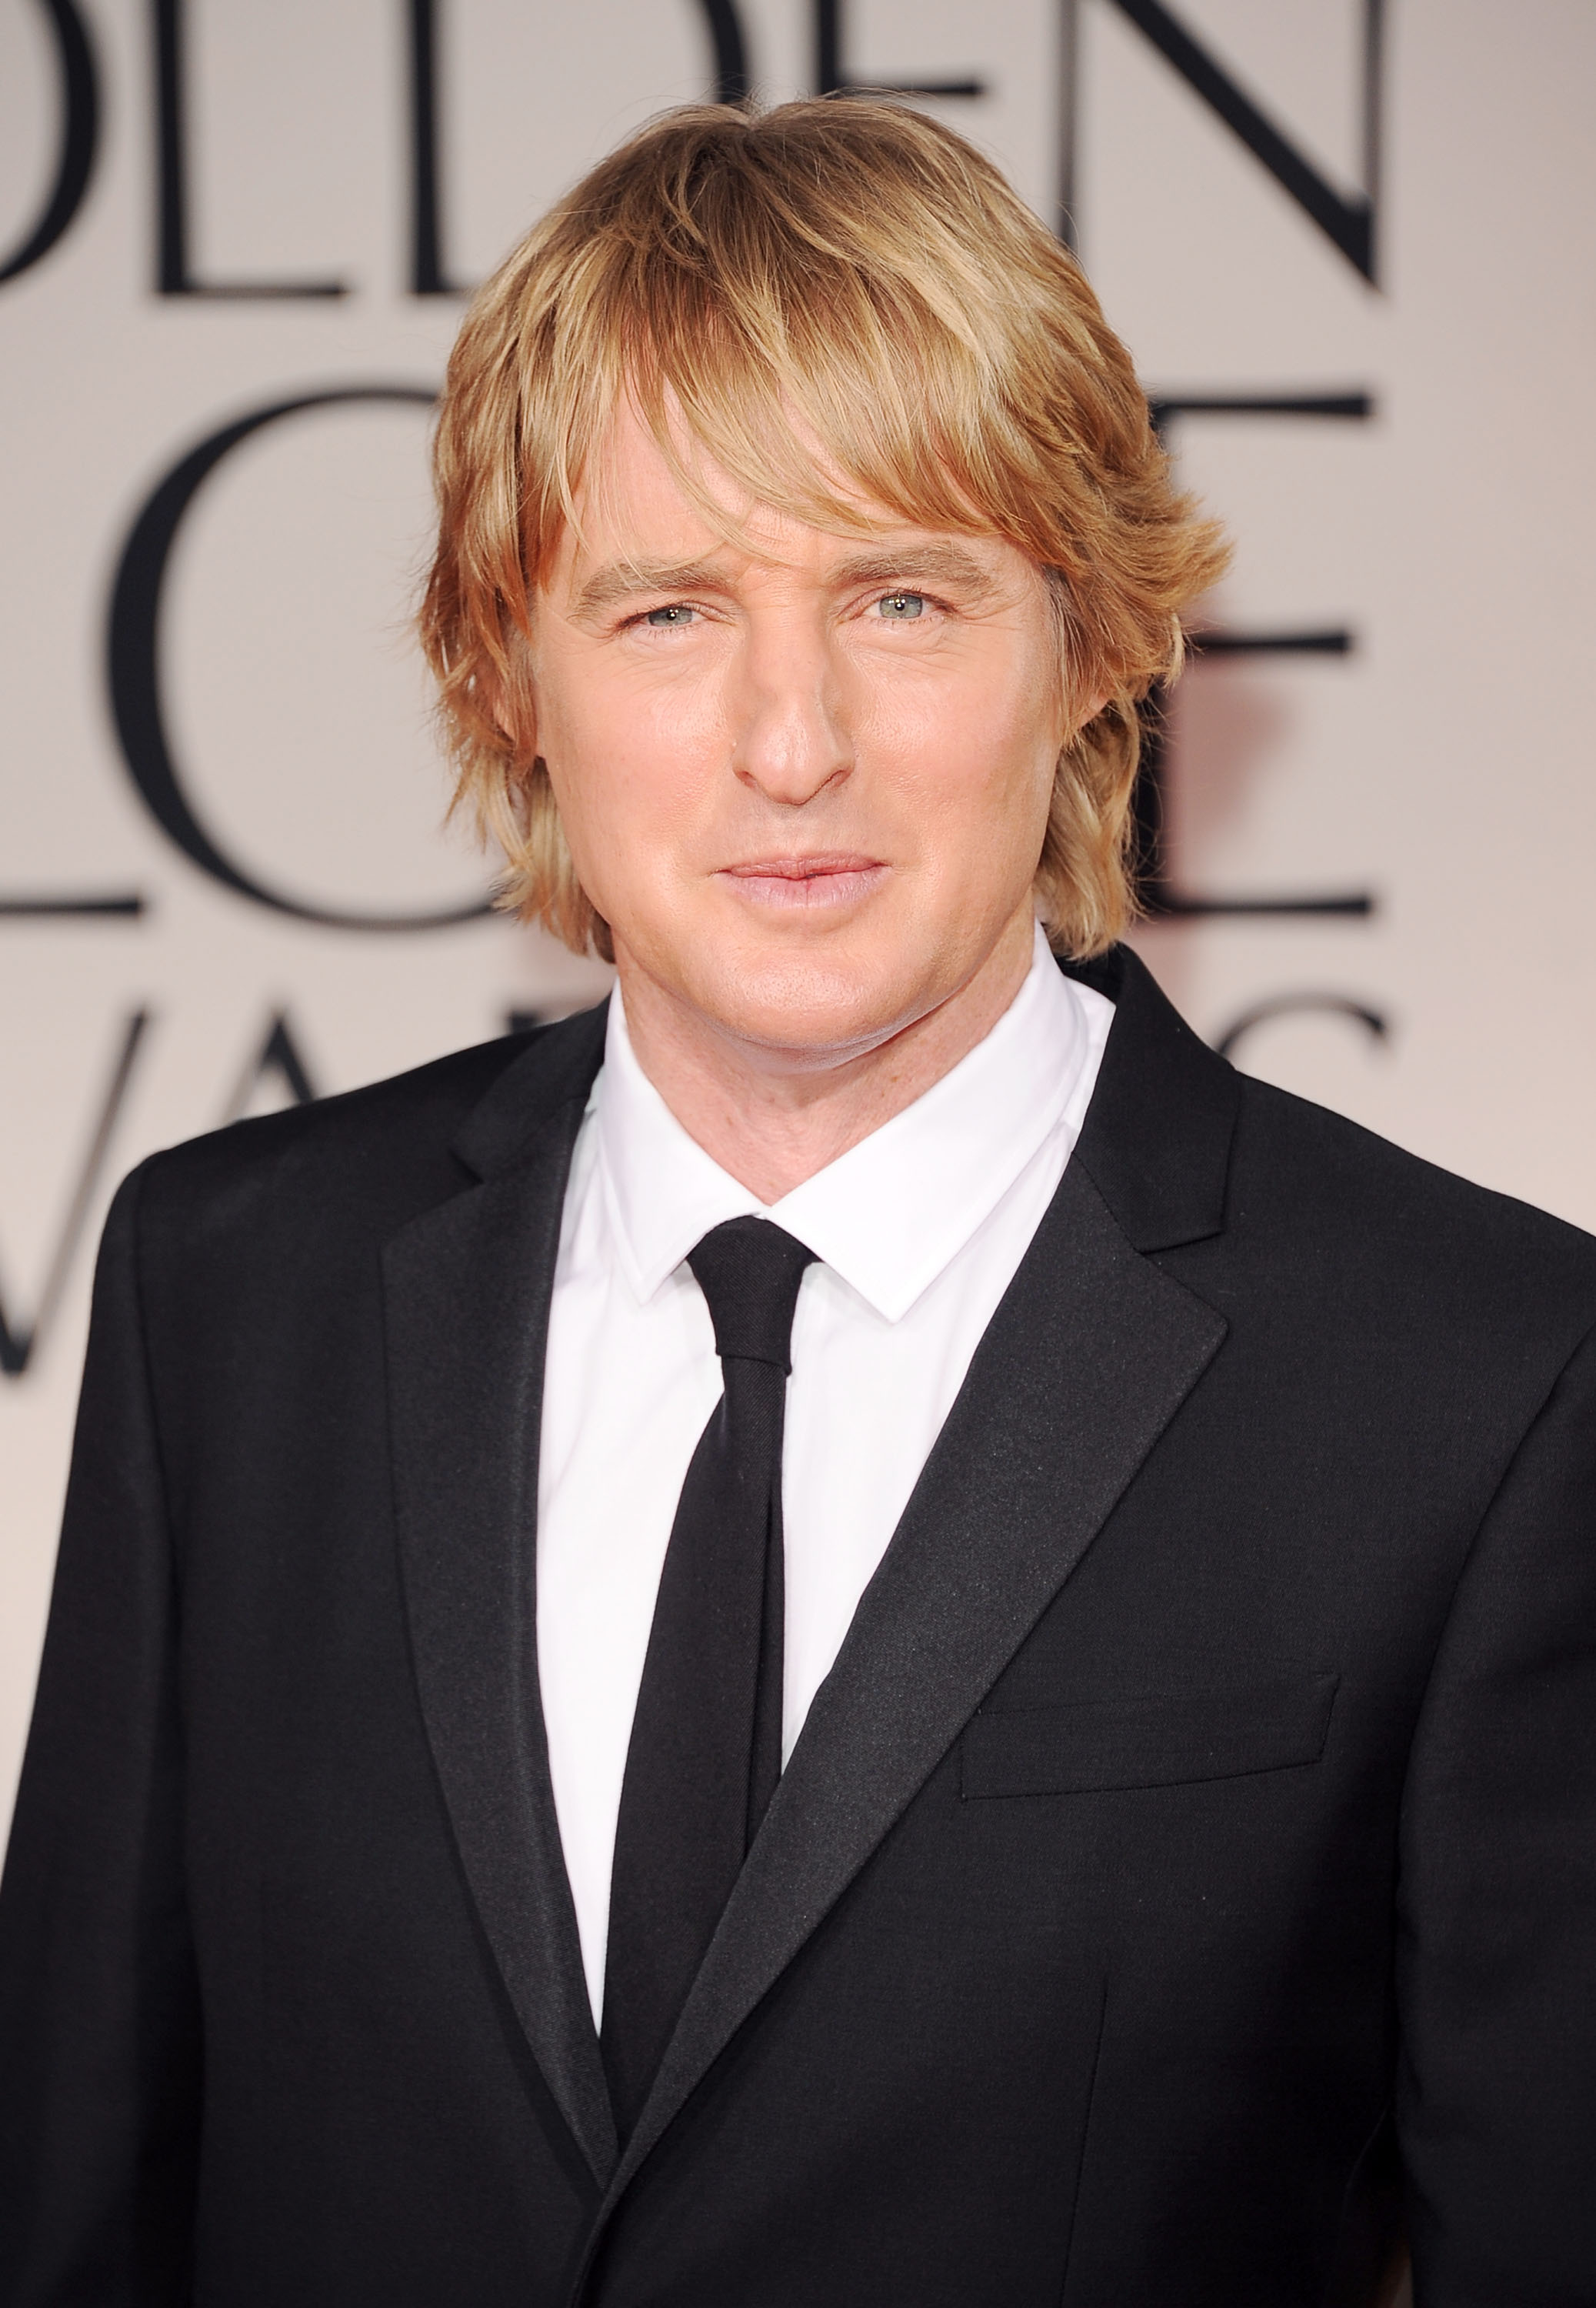 Actor Owen Wilson at the Beverly Hilton Hotel on January 15, 2012, in Beverly Hills, California | Source: Getty Images